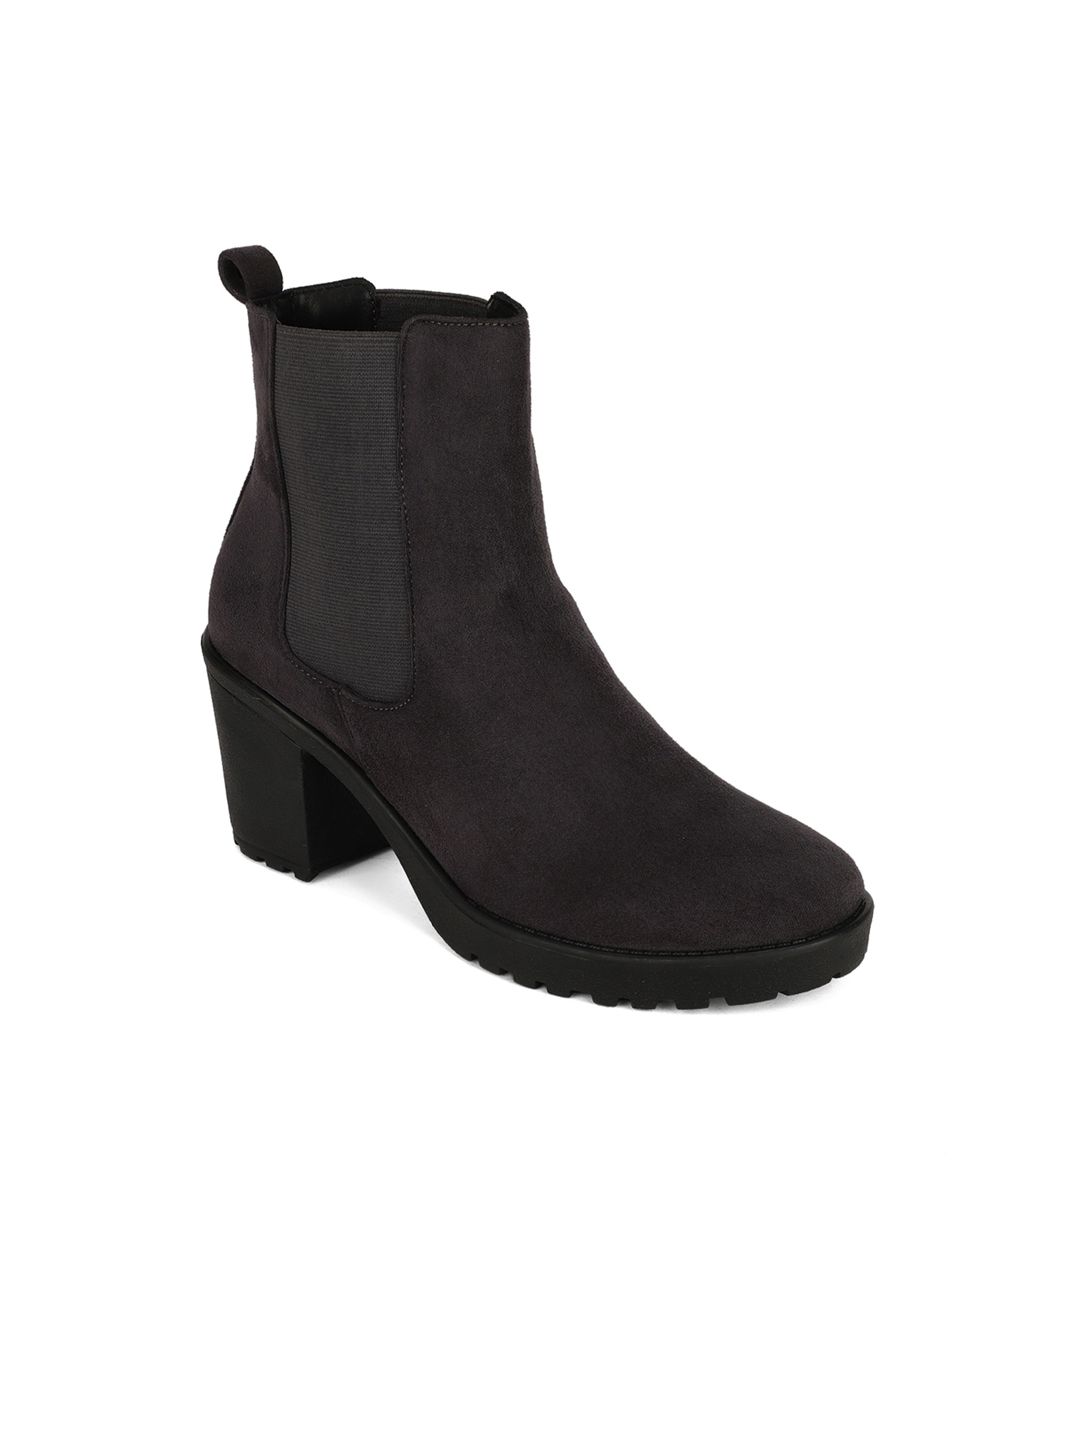 Bruno Manetti Grey Suede Mid-Top Block Heeled Boots Price in India